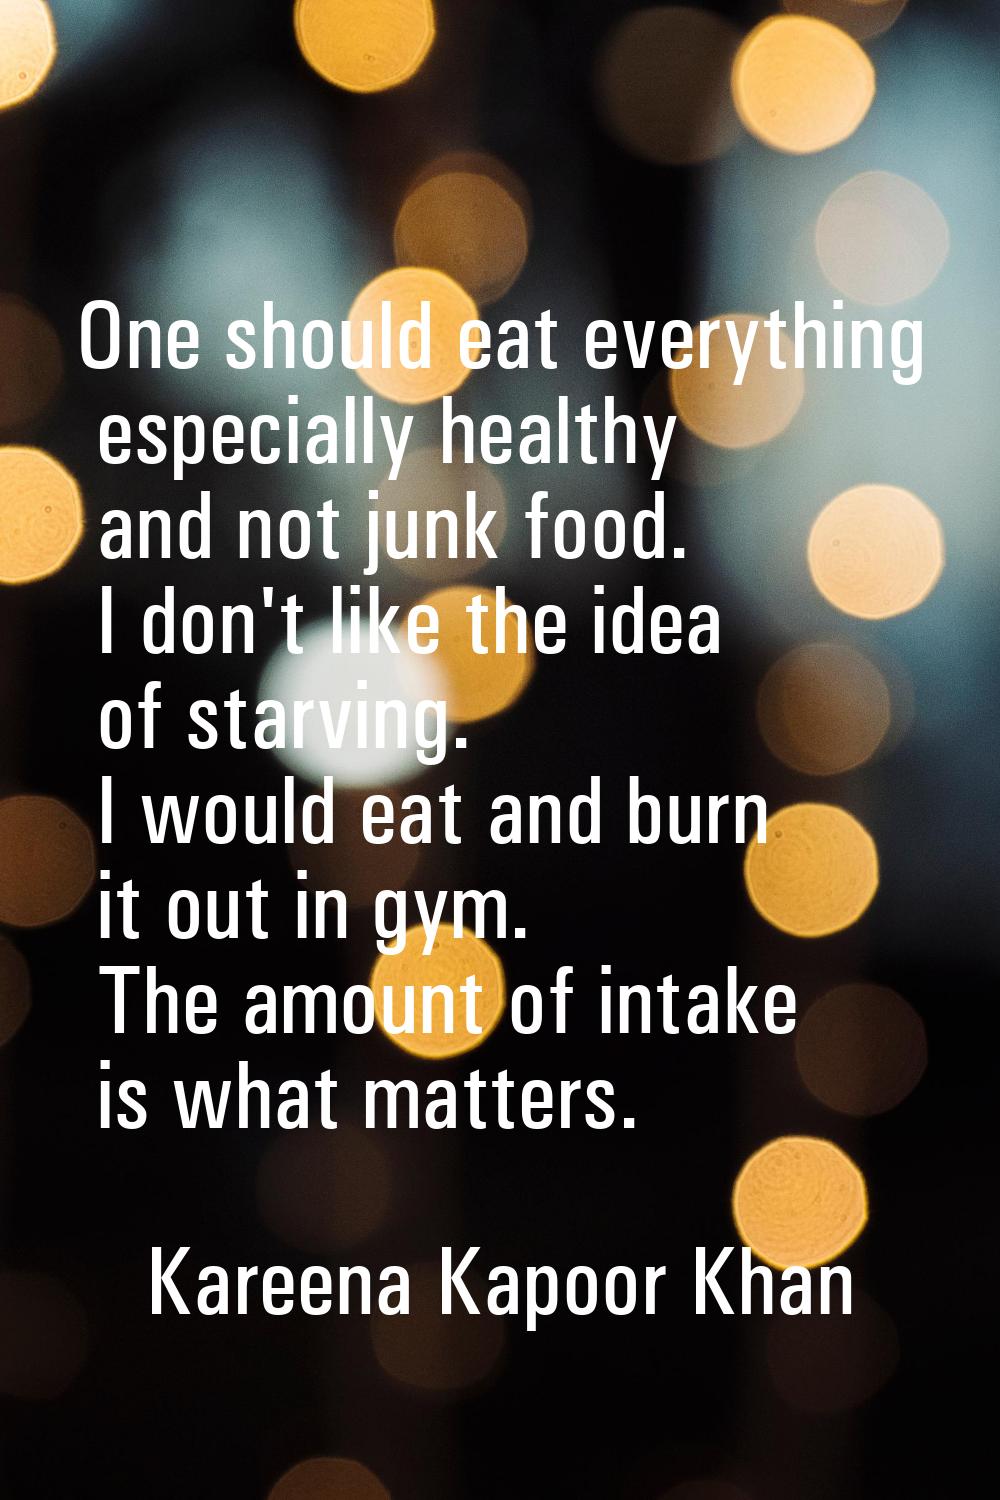 One should eat everything especially healthy and not junk food. I don't like the idea of starving. 